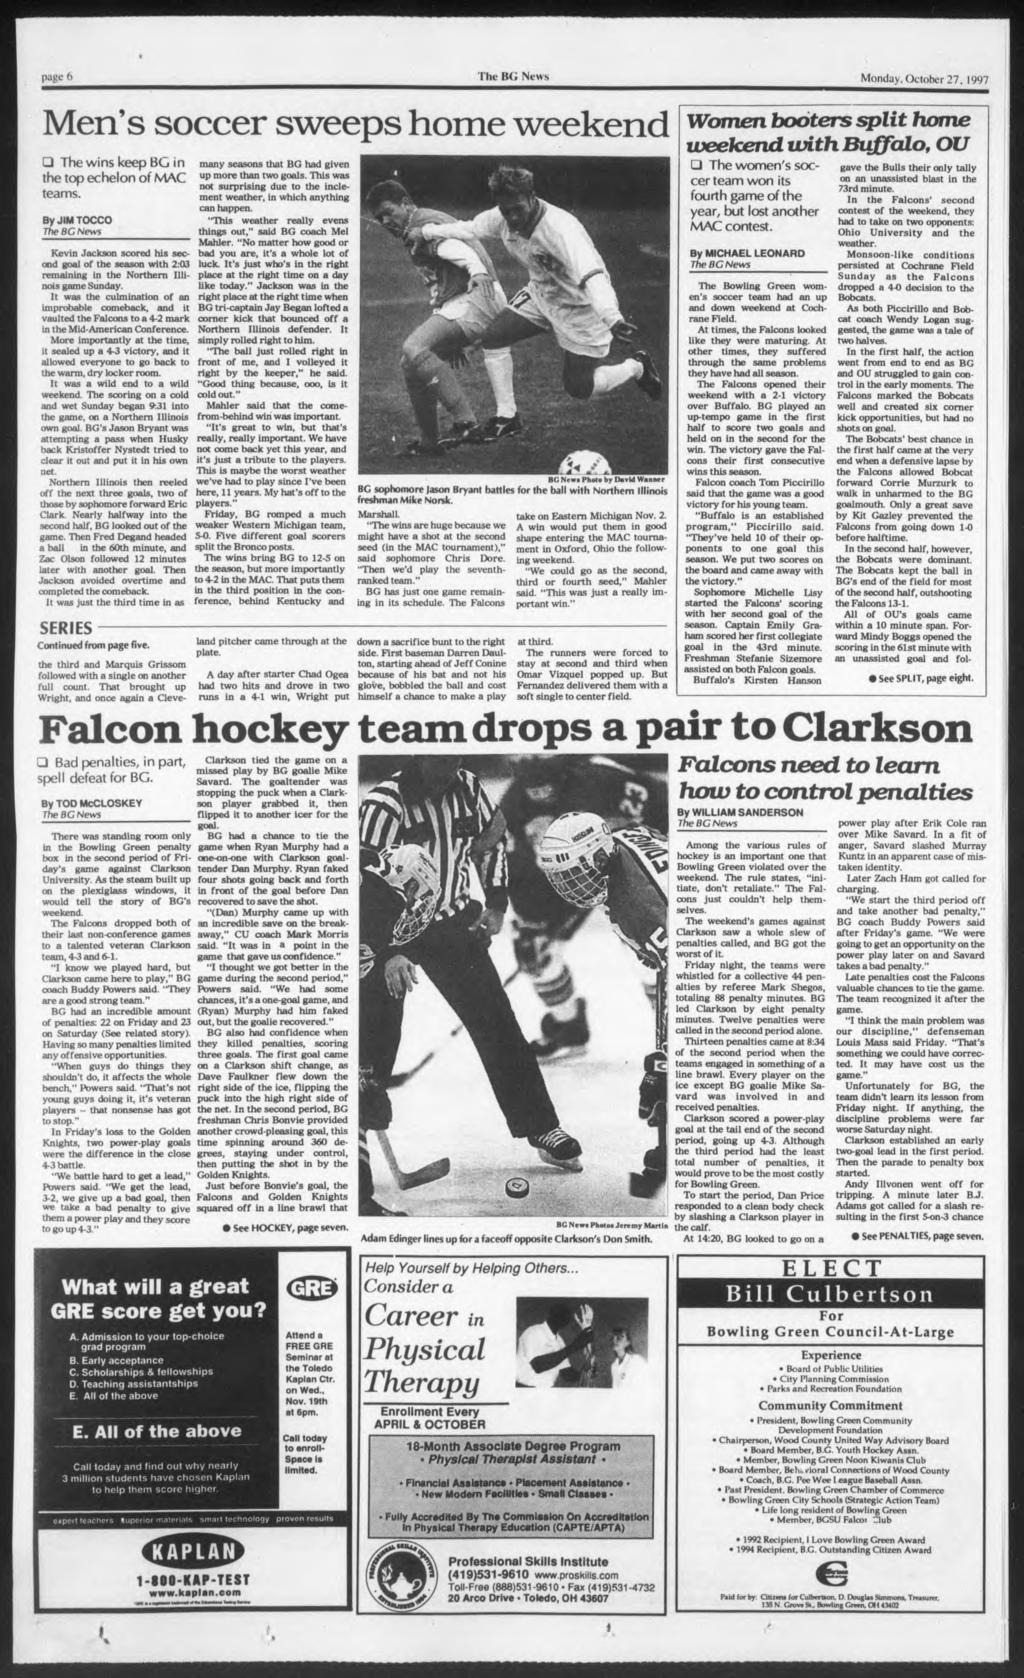 page 6 Monday. October 27. 1997 Men's soccer sweeps home weekend The wins keep BG in the top echelon of MAC teams.